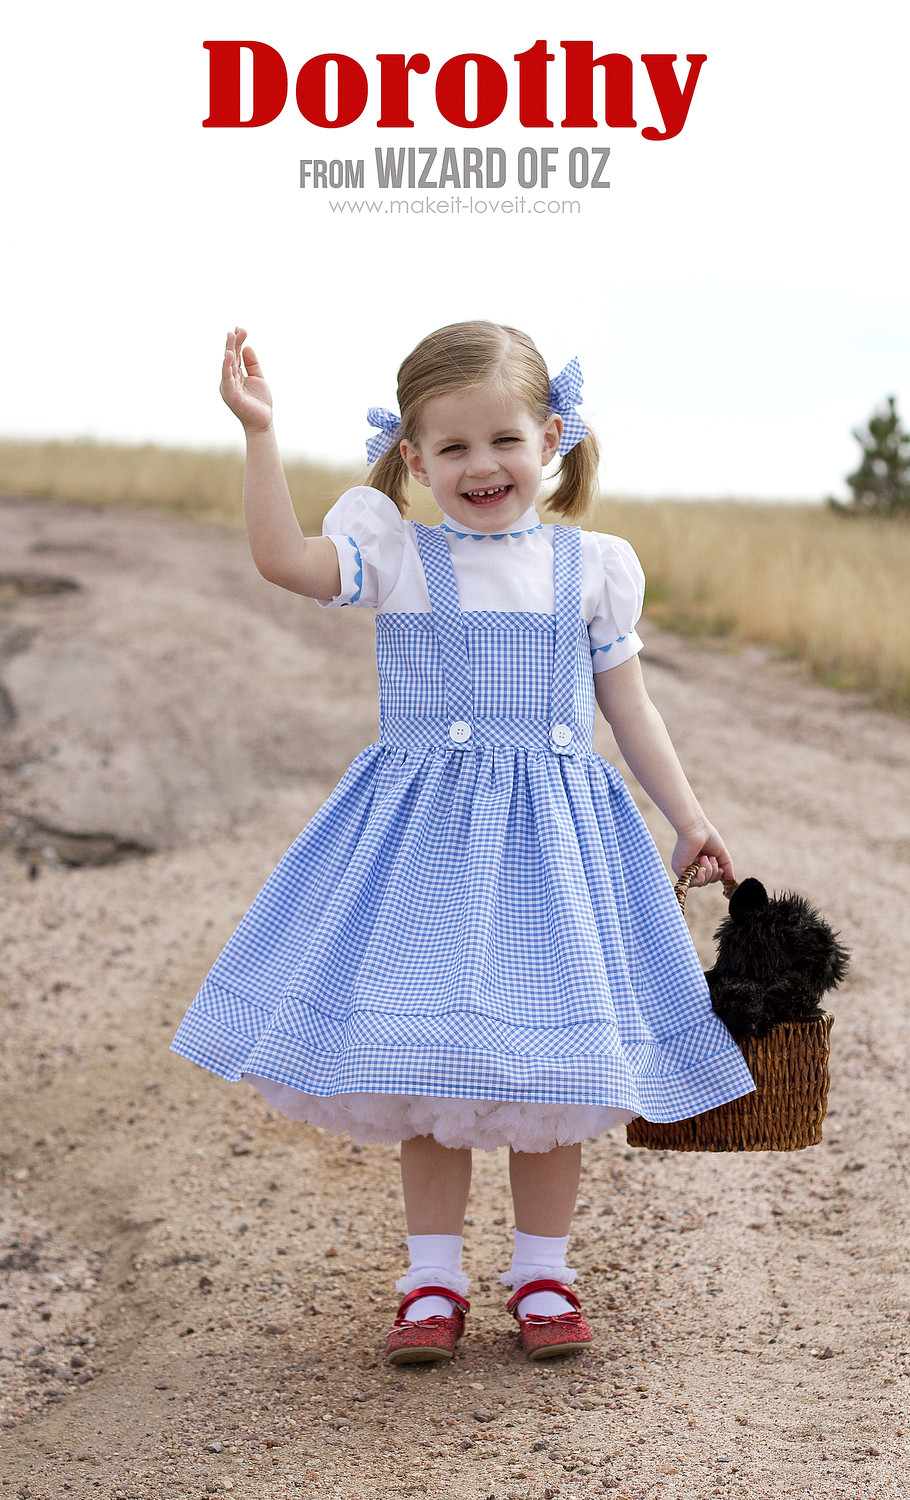 DIY Wizard Of Oz Costume
 Our Geeky Adventure October 2014